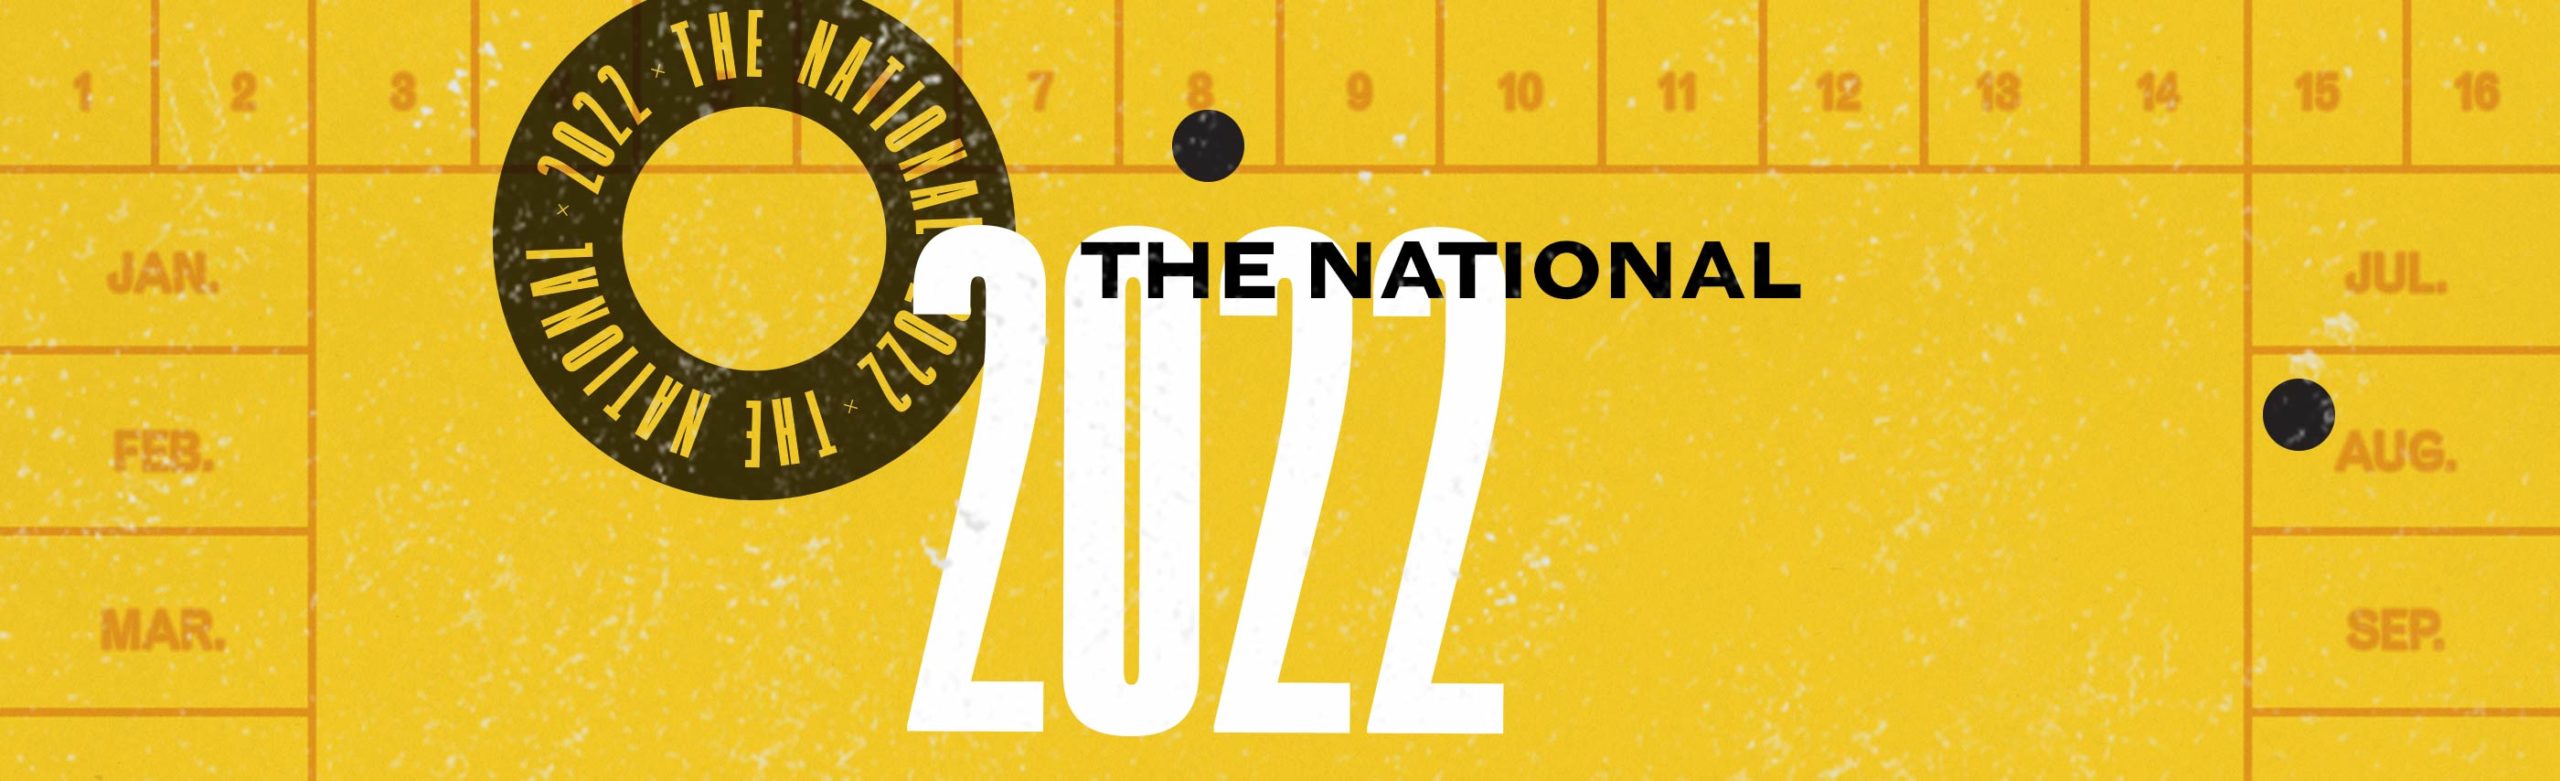 The National Tickets Giveaway 2022 Image